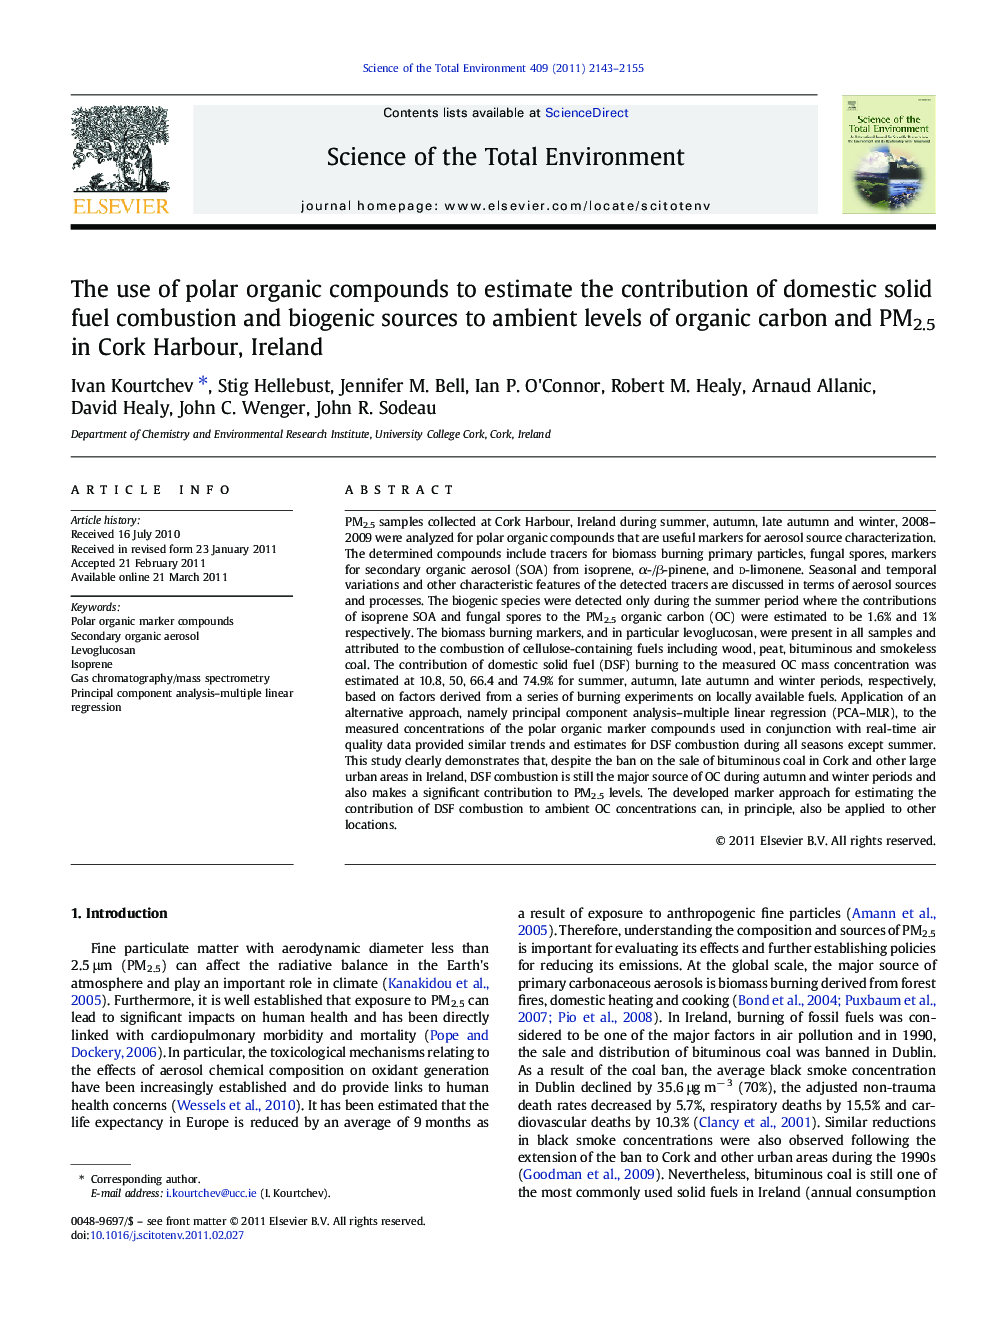 The use of polar organic compounds to estimate the contribution of domestic solid fuel combustion and biogenic sources to ambient levels of organic carbon and PM2.5 in Cork Harbour, Ireland